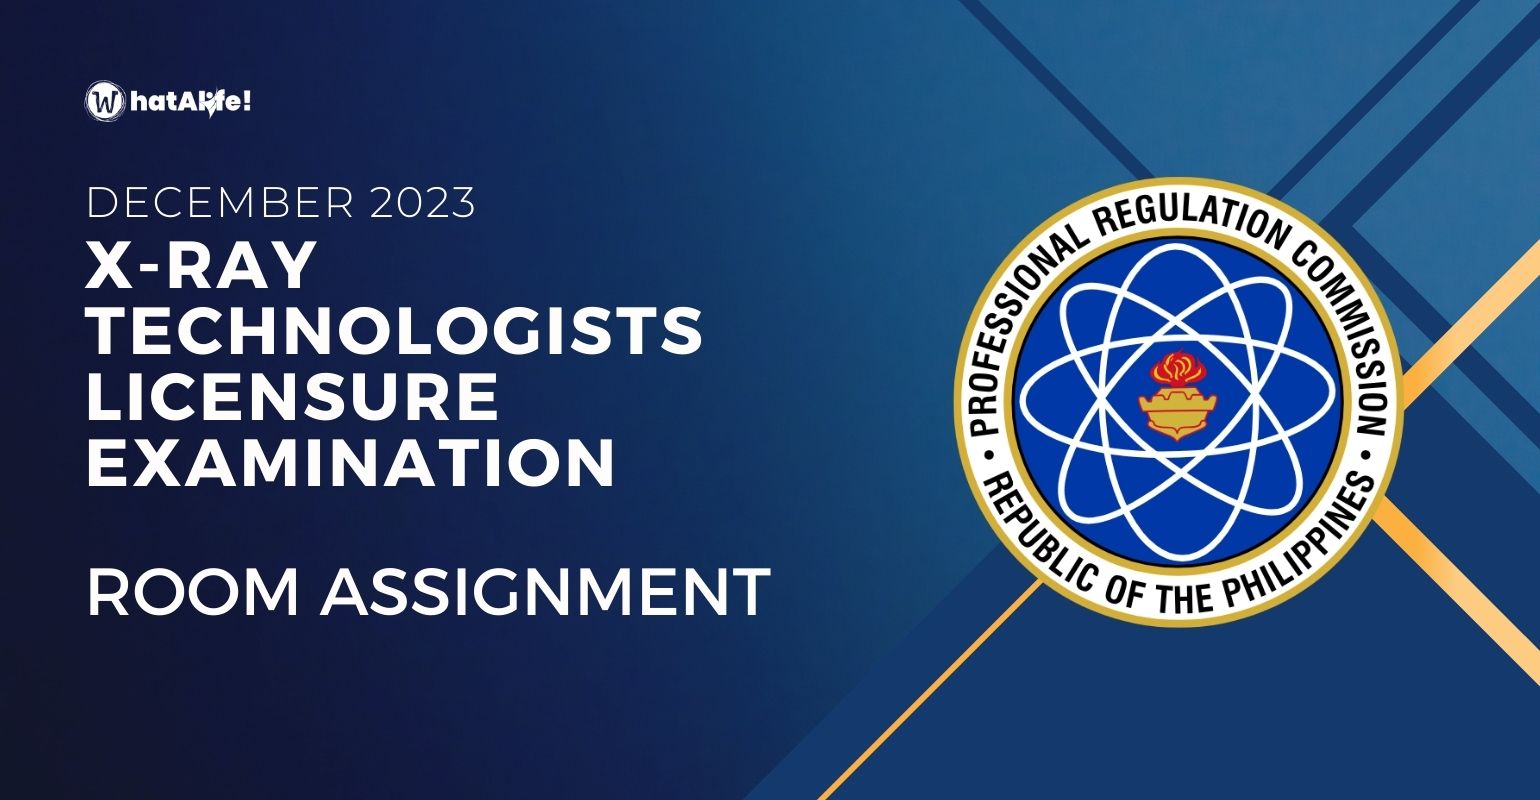 Room Assignment — December 2023 X-ray Technologists Licensure Exam